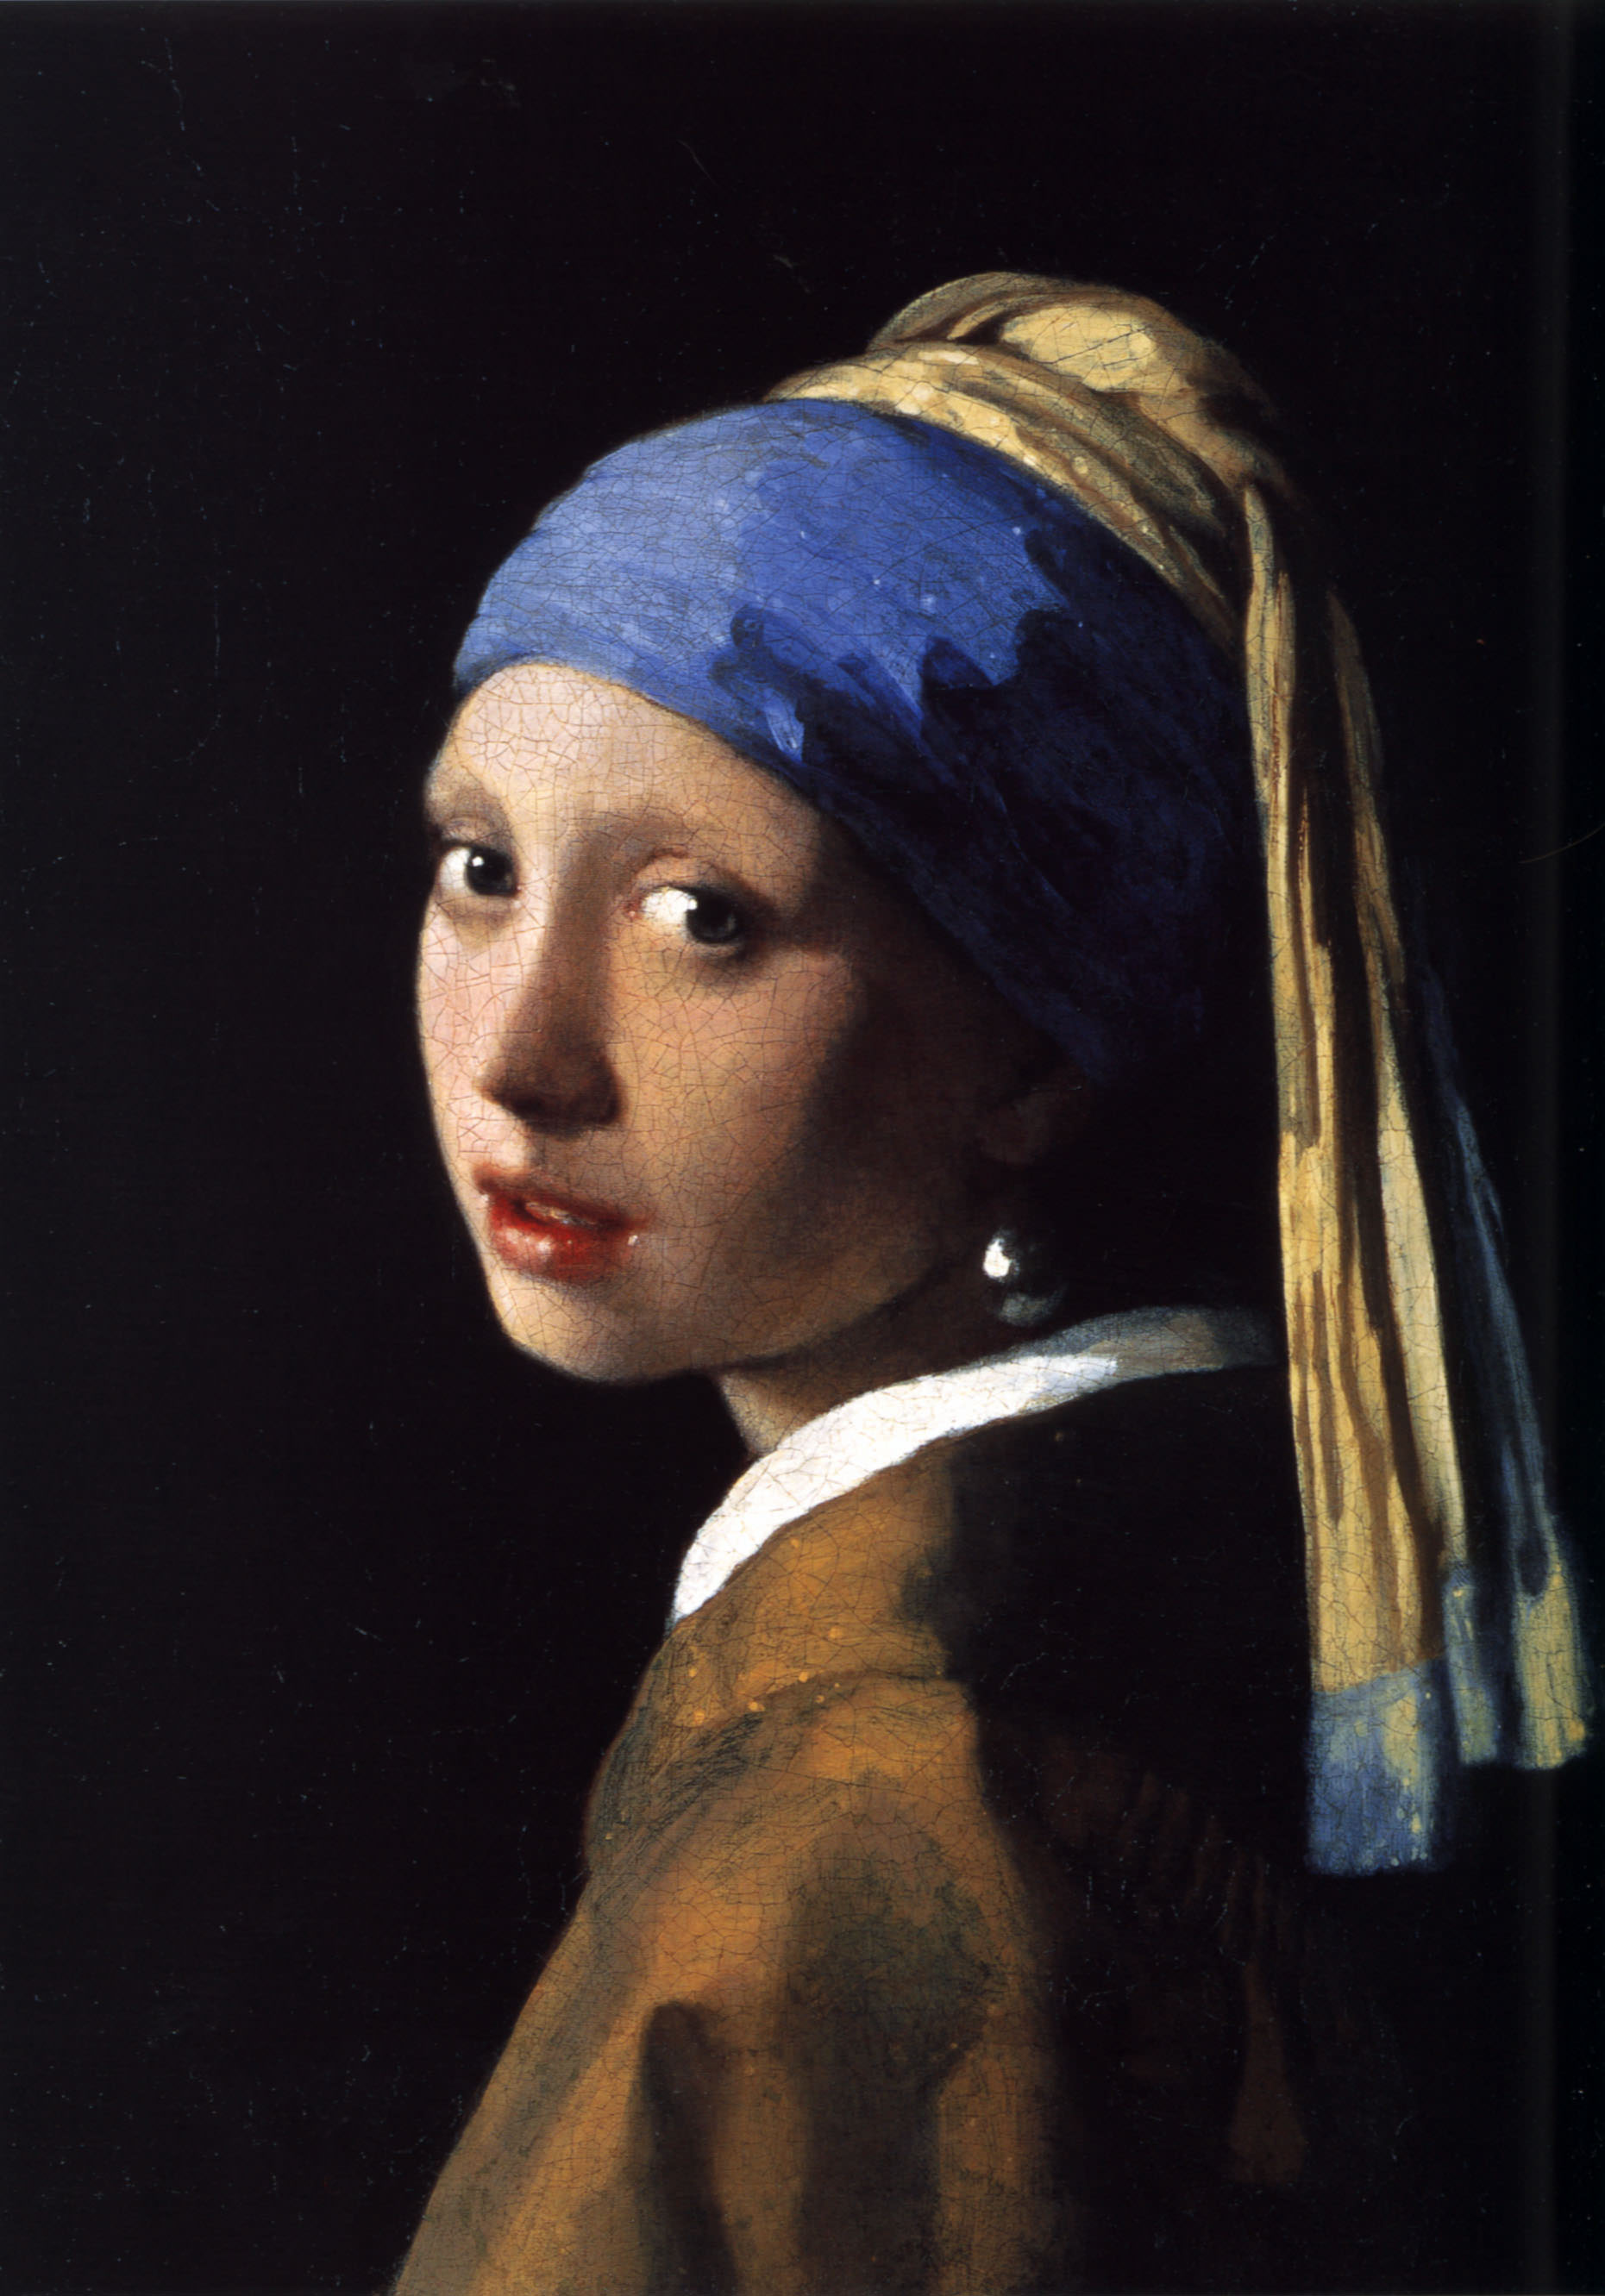 ['<em>The girl with the pearl earring (1665)</em>' ]